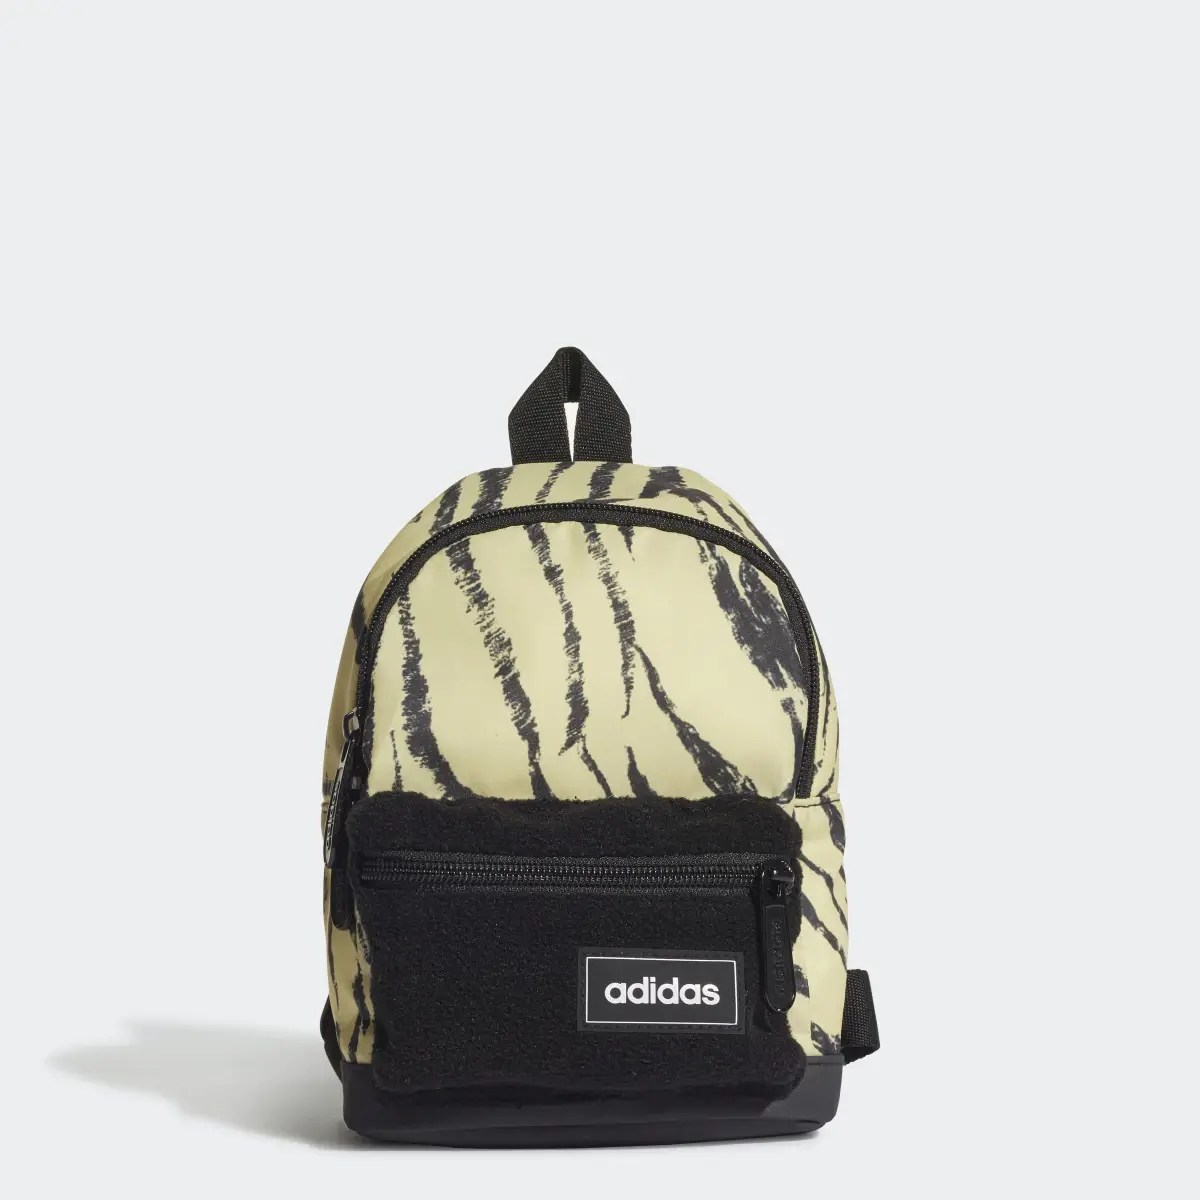 Adidas Tailored for Her Sport to Street Training Mini Backpack. 1